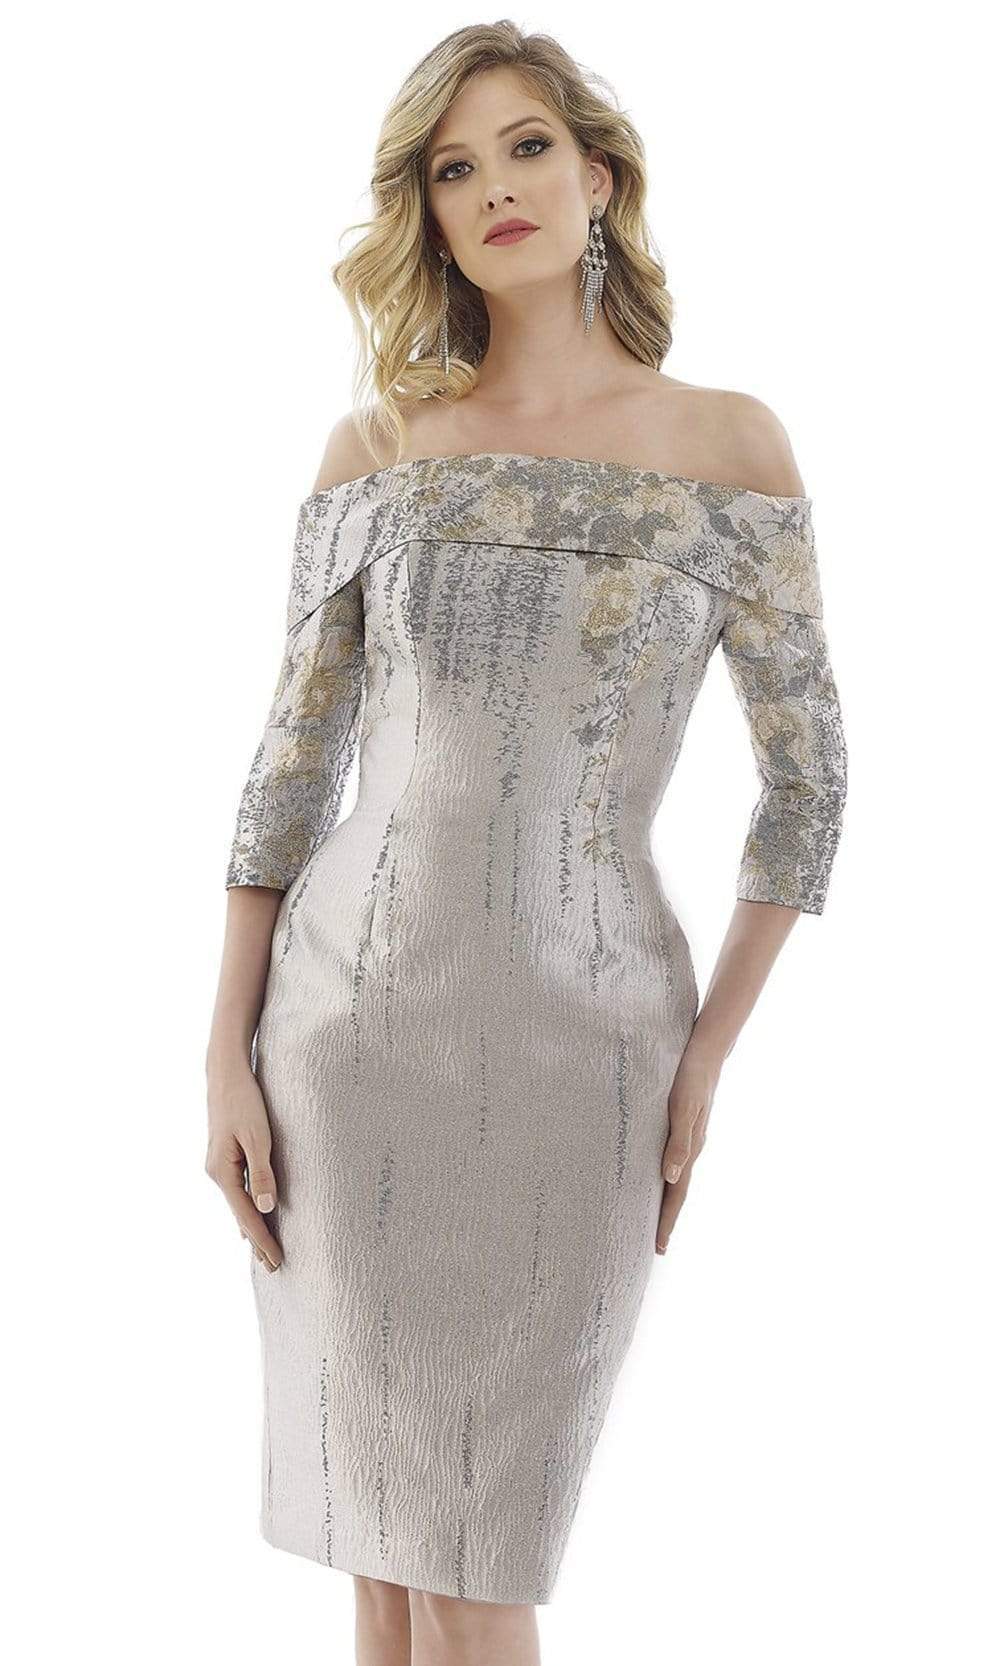 Gia Franco - Metallic Floral Off Shoulder Dress 12974 - 1 pc Silver In Size 16 Available CCSALE 16 / Silver